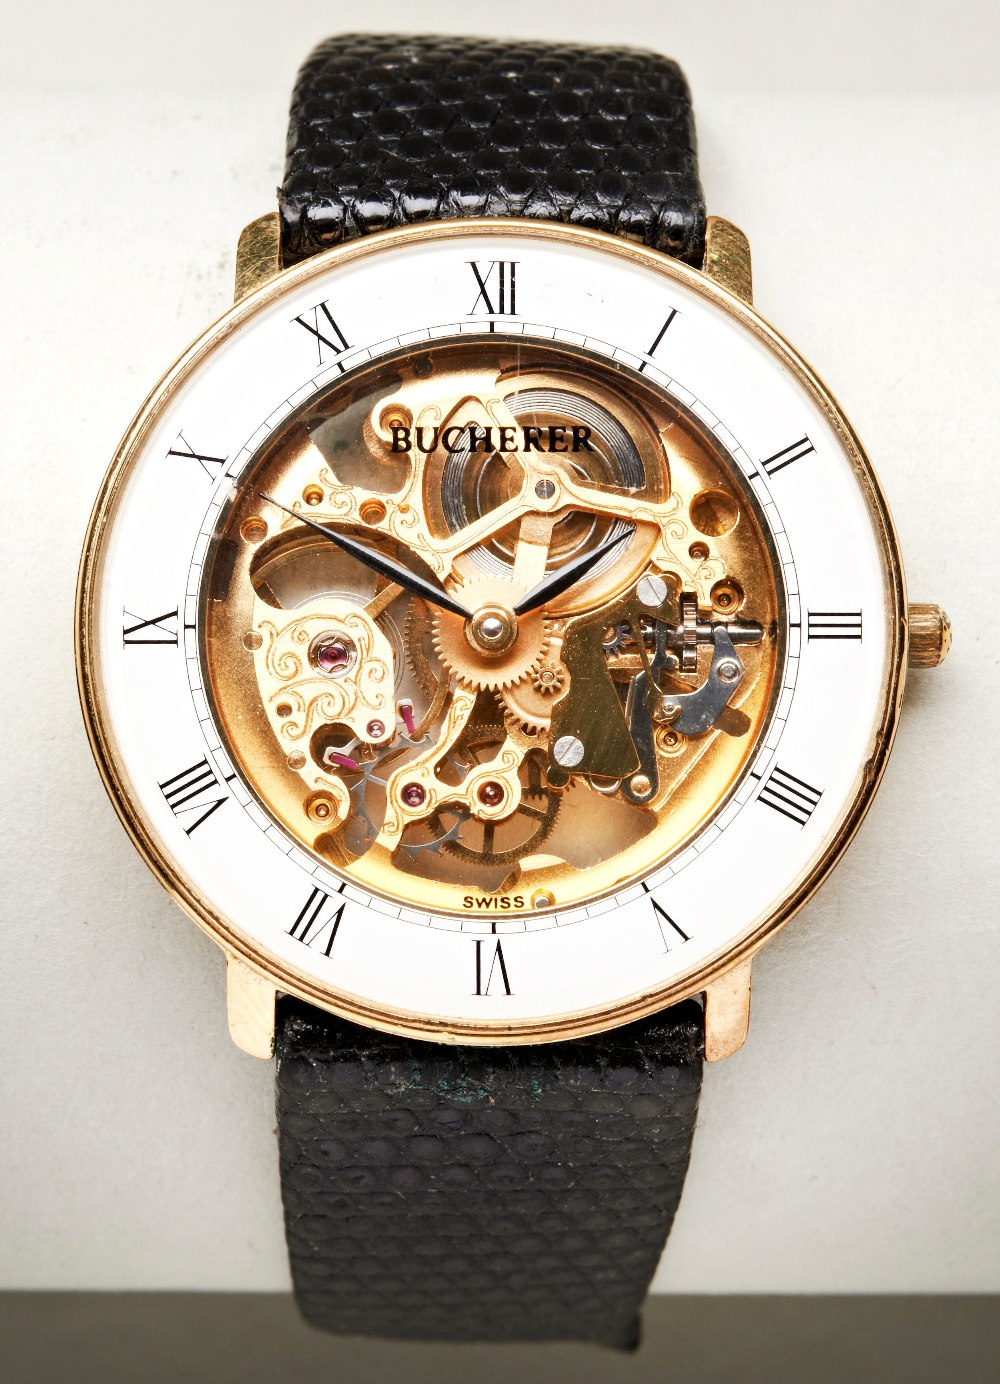 BUCHERER GOLD PLATED MANUAL WIND SKELETON WATCH, the white chapter ring with Roman numerals